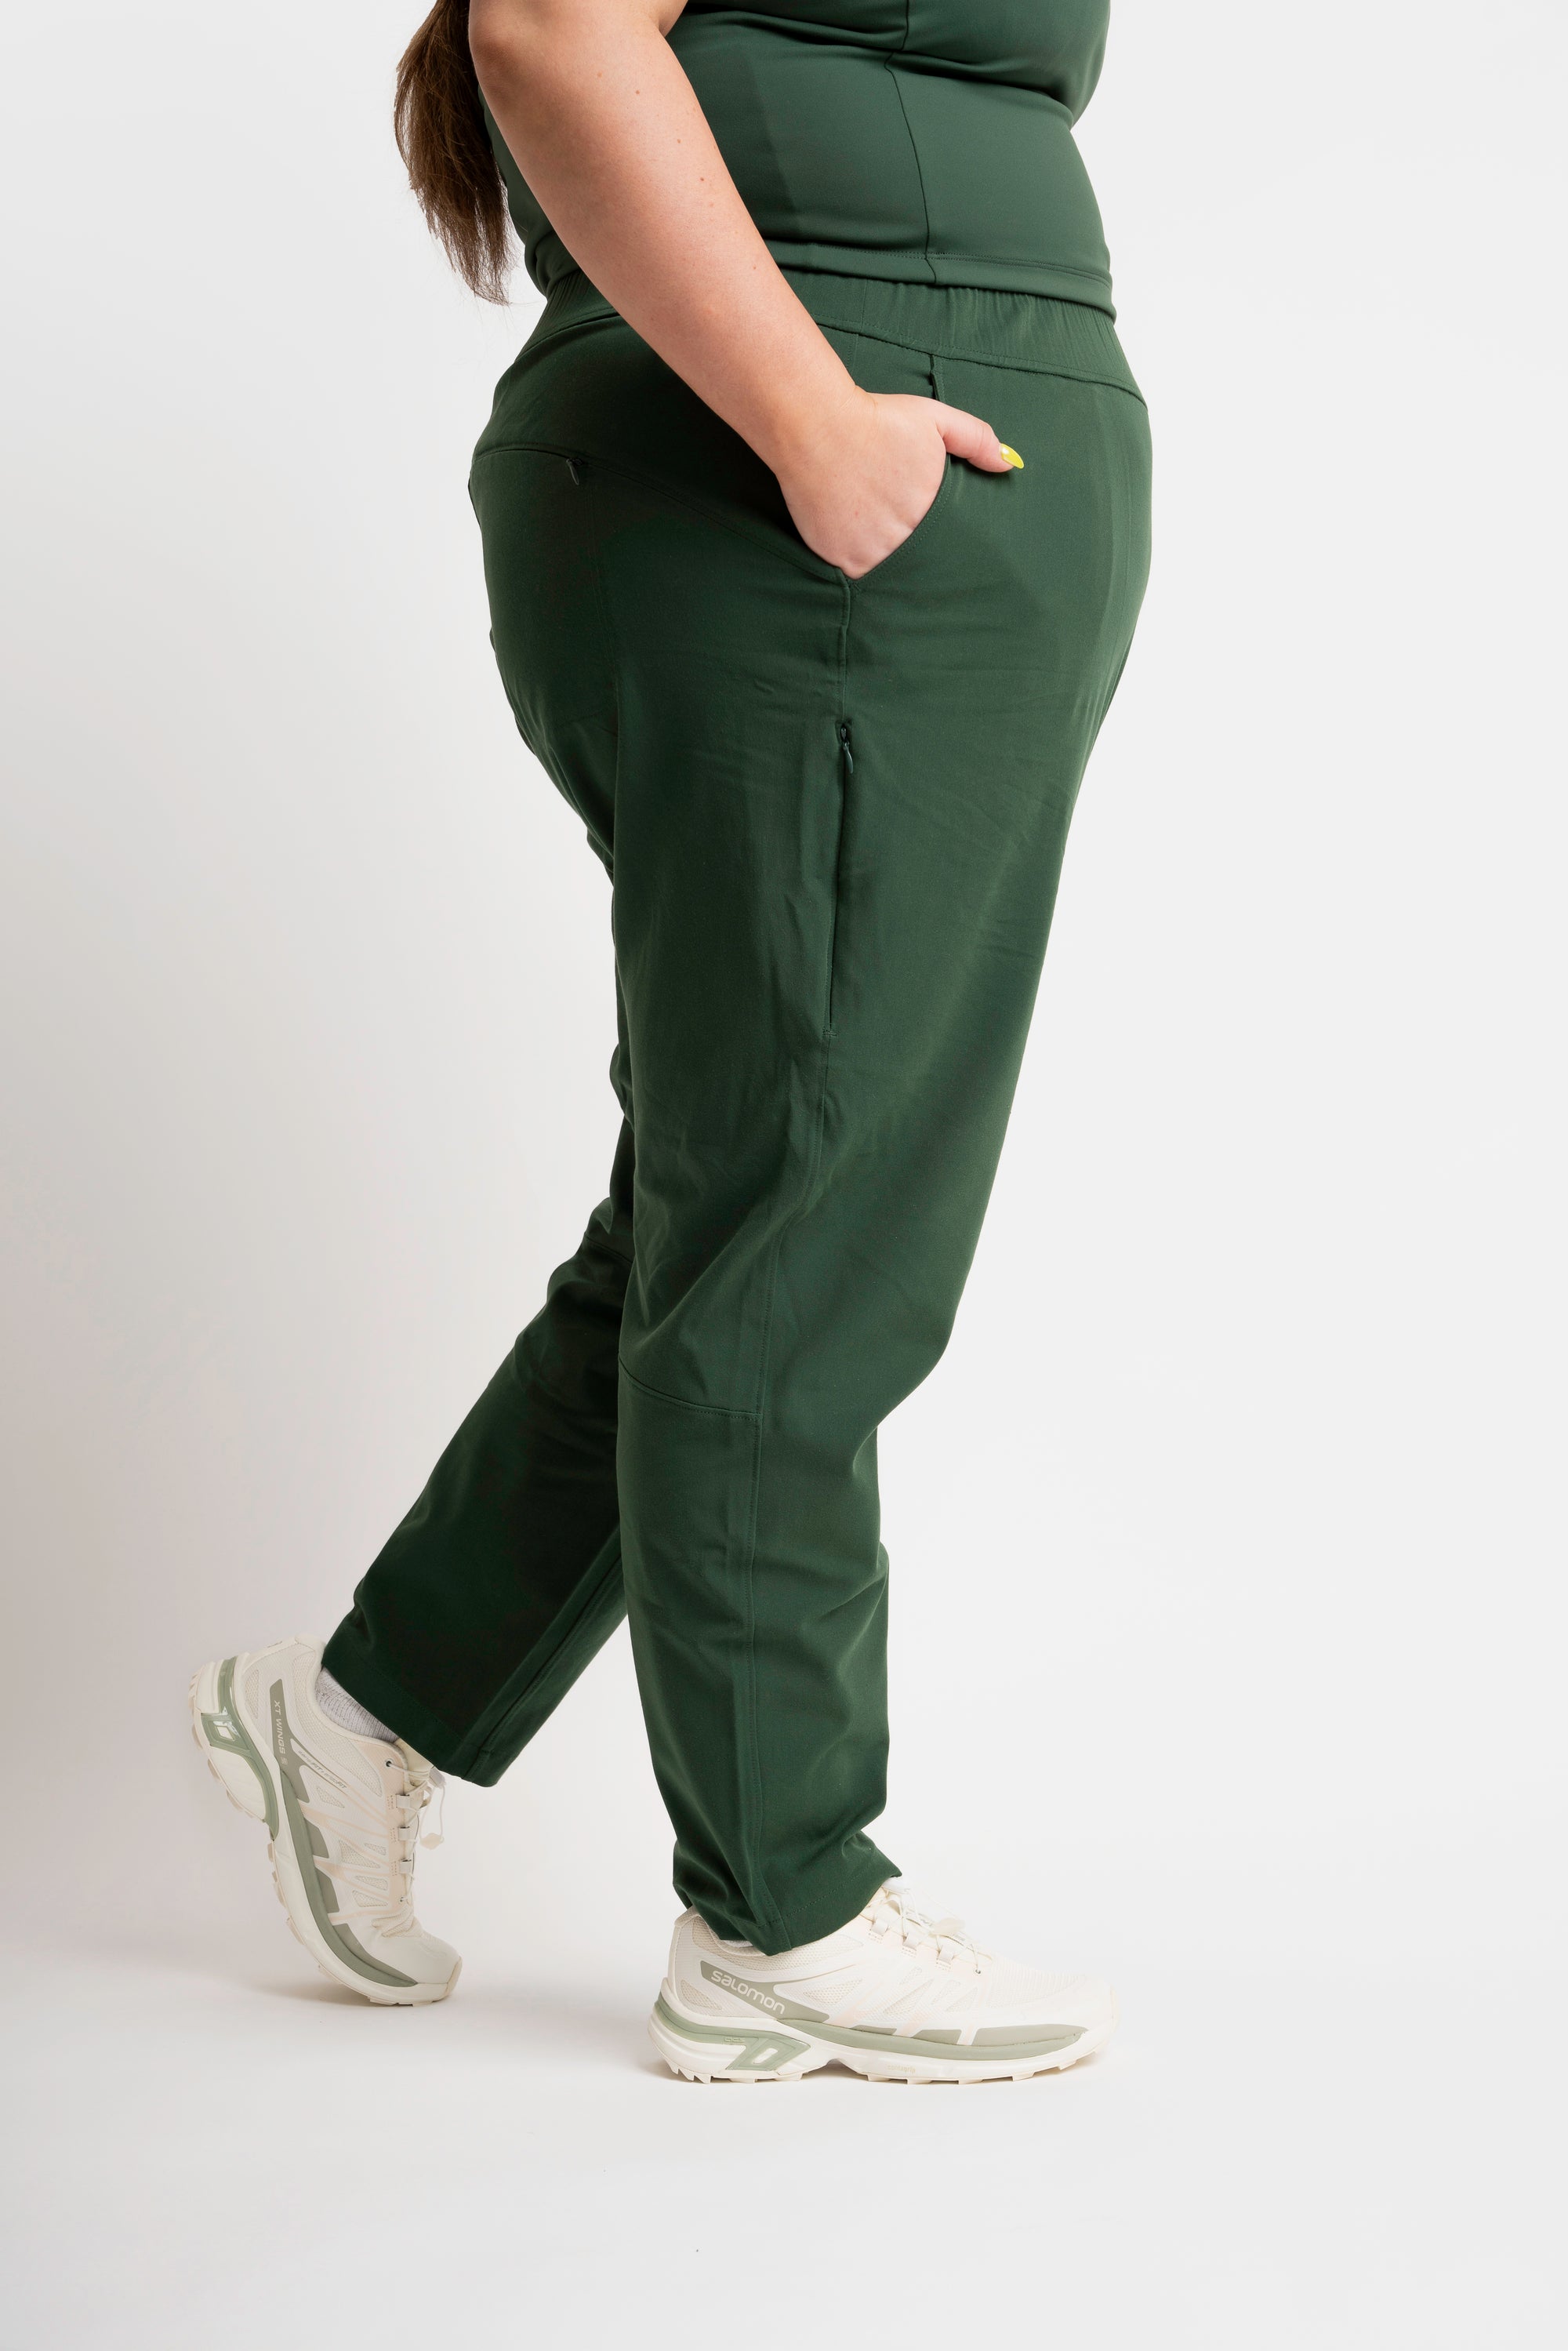 Alo Yoga - Cargo Venture Pants - BRAND NEW IN BAG for Sale in